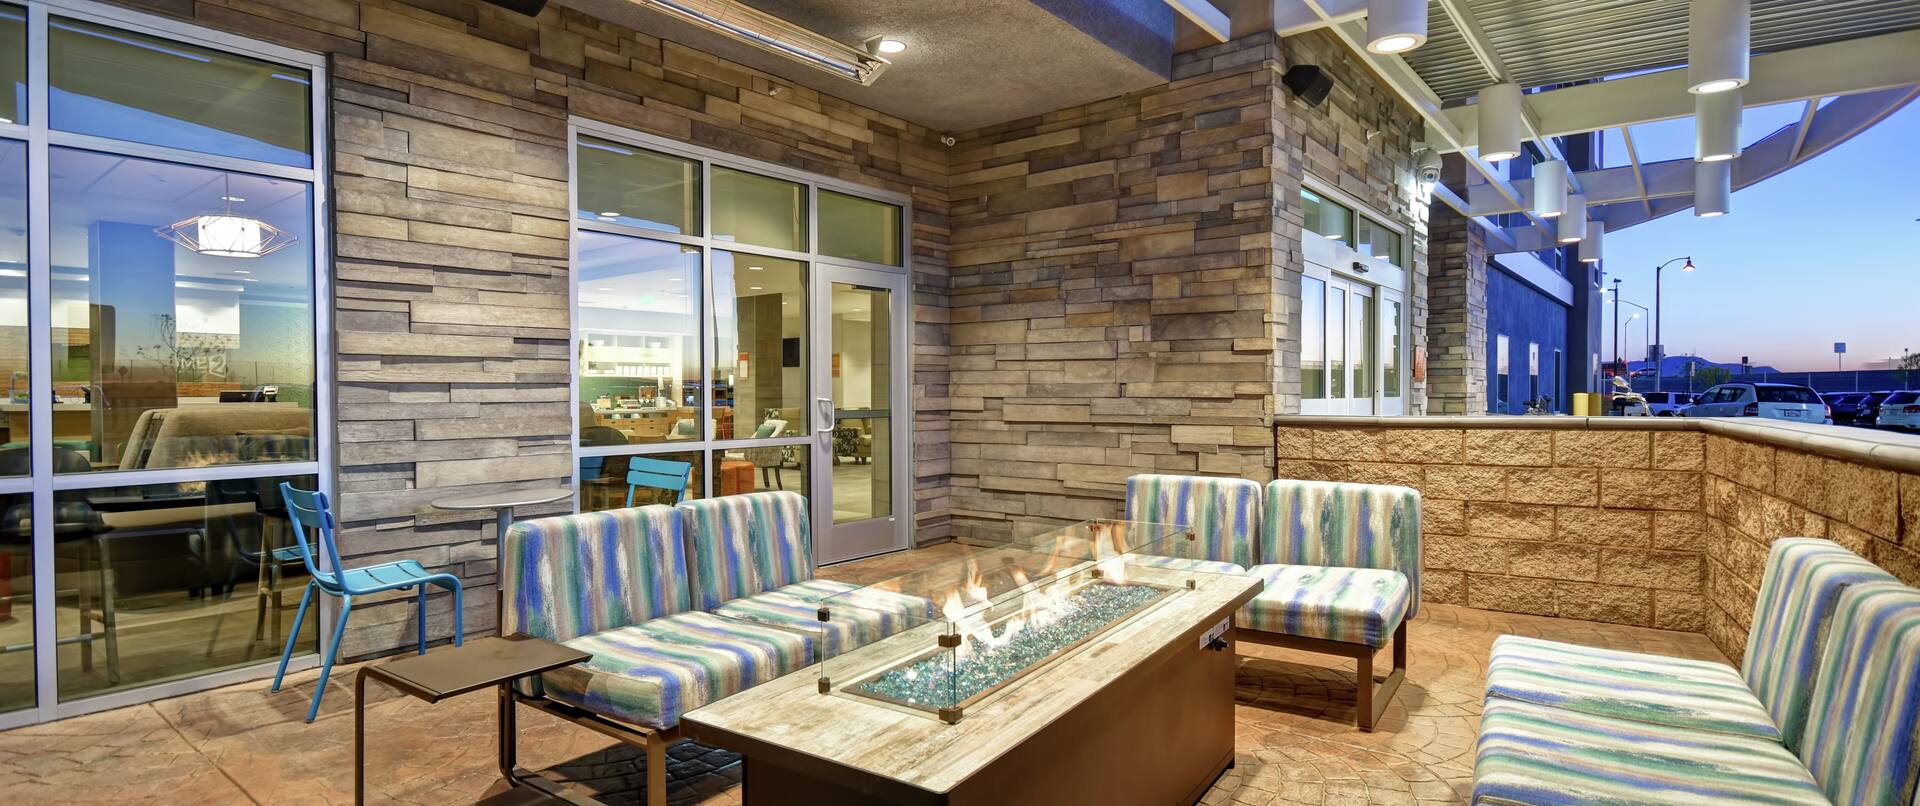 Outdoor Patio Seating and Firepit in Evening